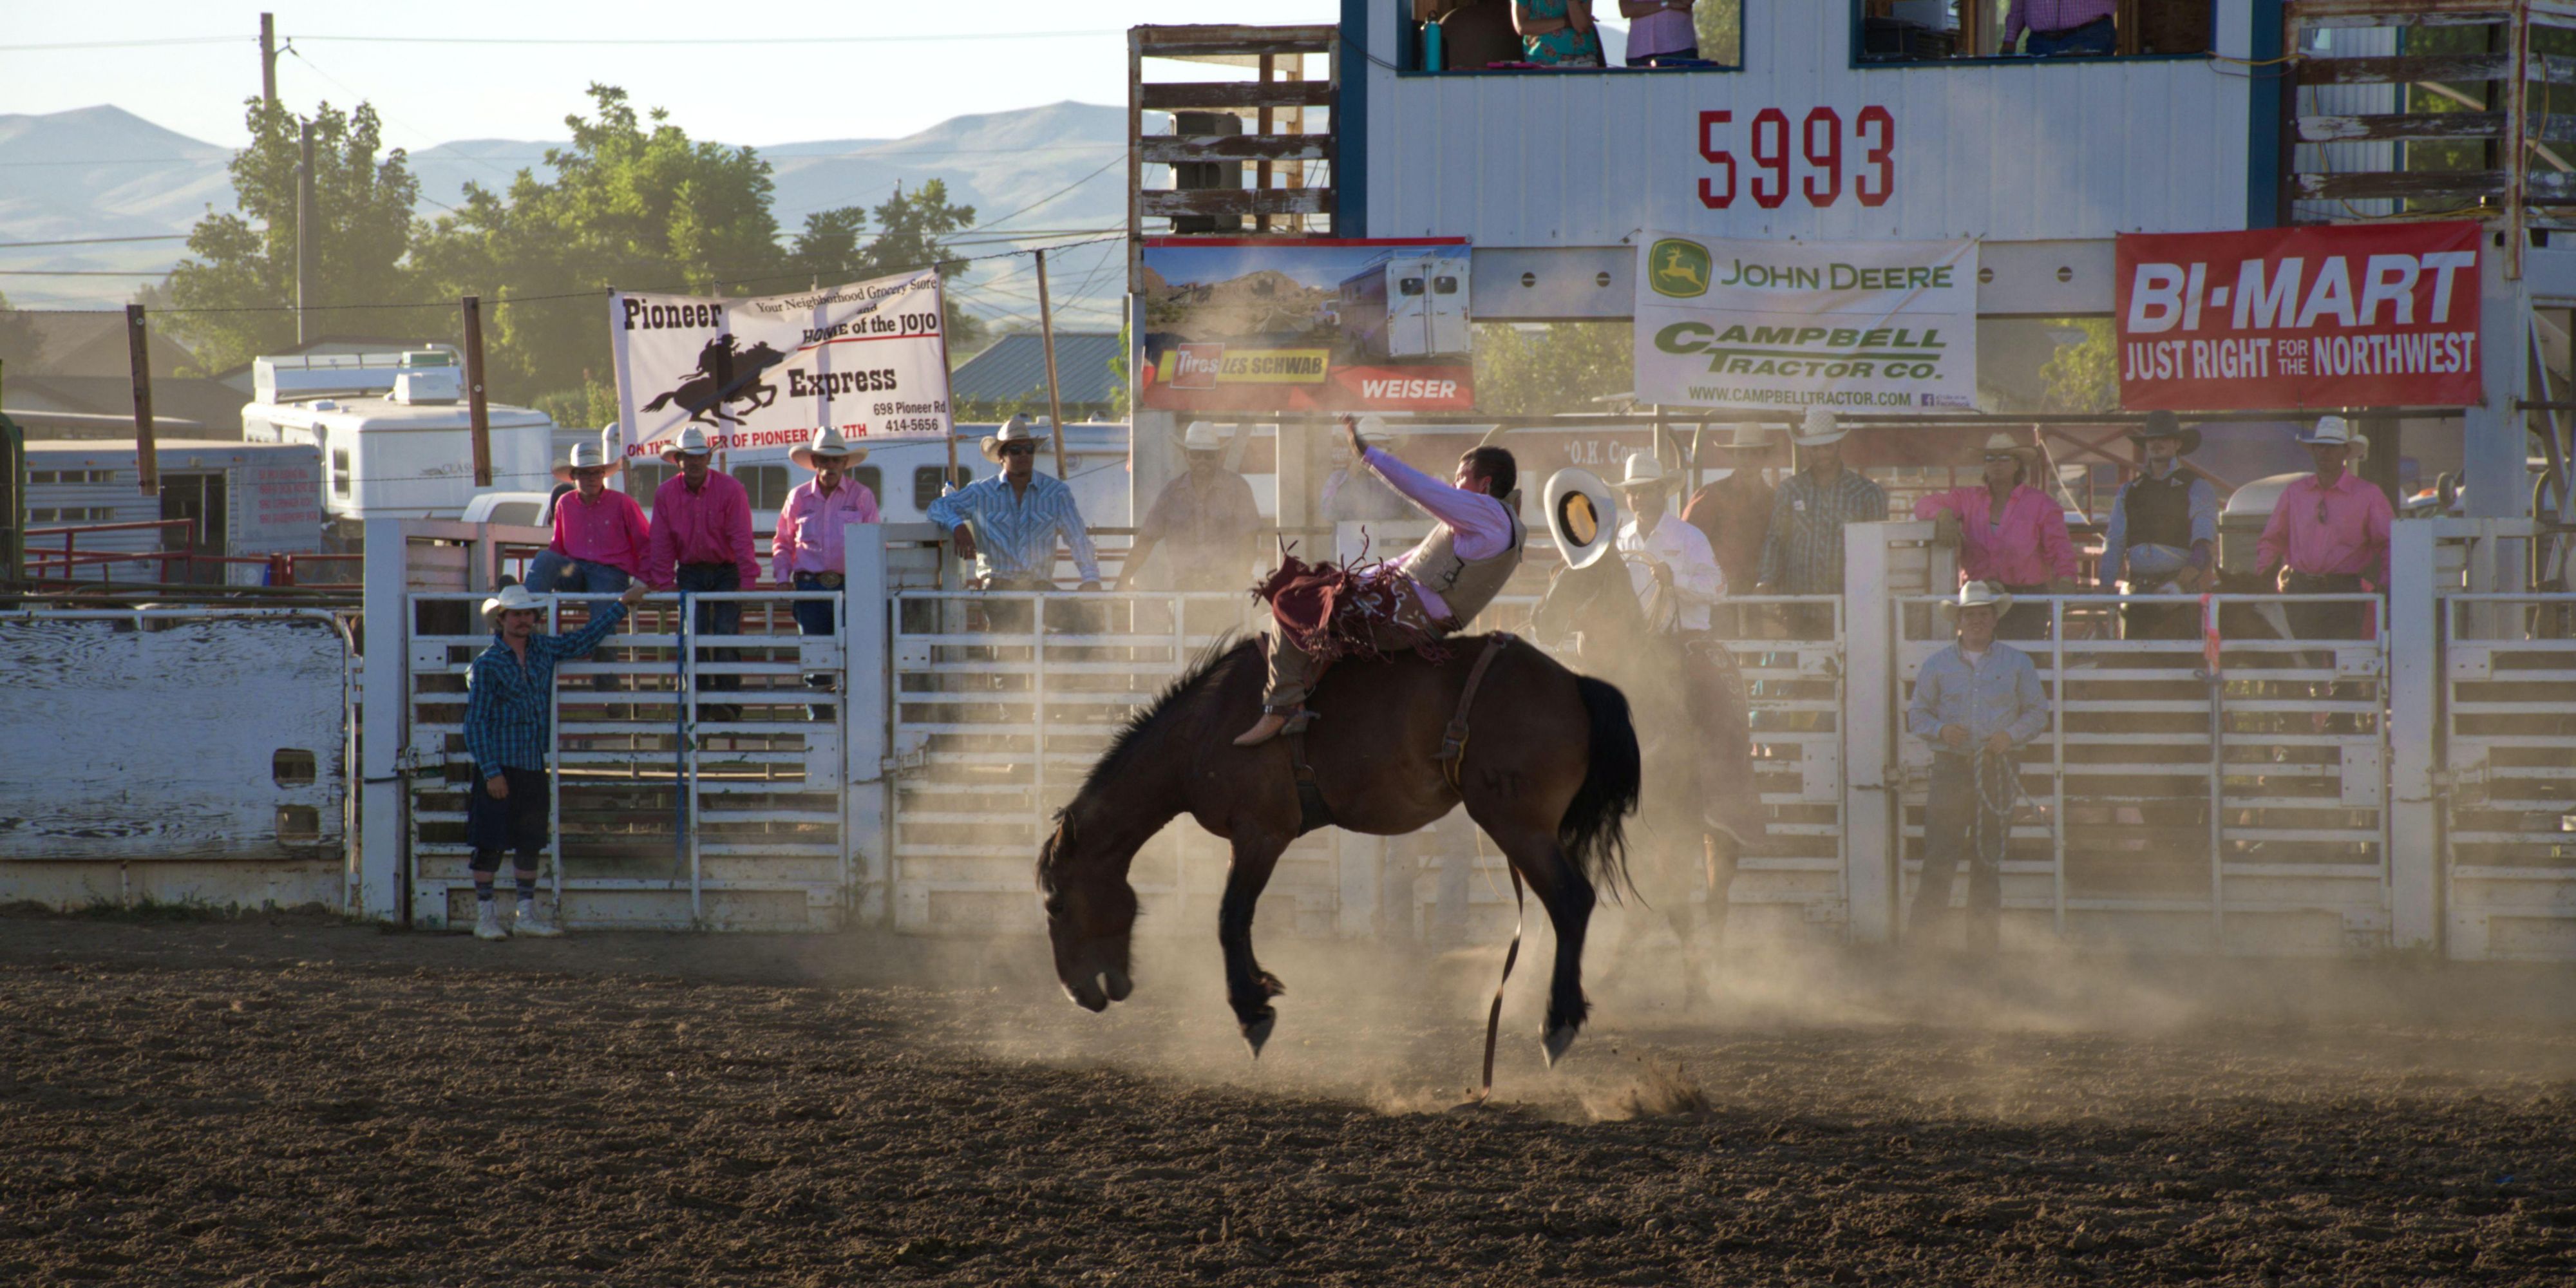 Have some fun at the Johnson County Fair and Rodeo, go to the Monster Truck Show, watch the experts at Extreme Bull Riding events or see a Tractor Pull. There is always something happening at the Fairgrounds and this hotel in Buffalo, WY is located just minutes from all the fun!